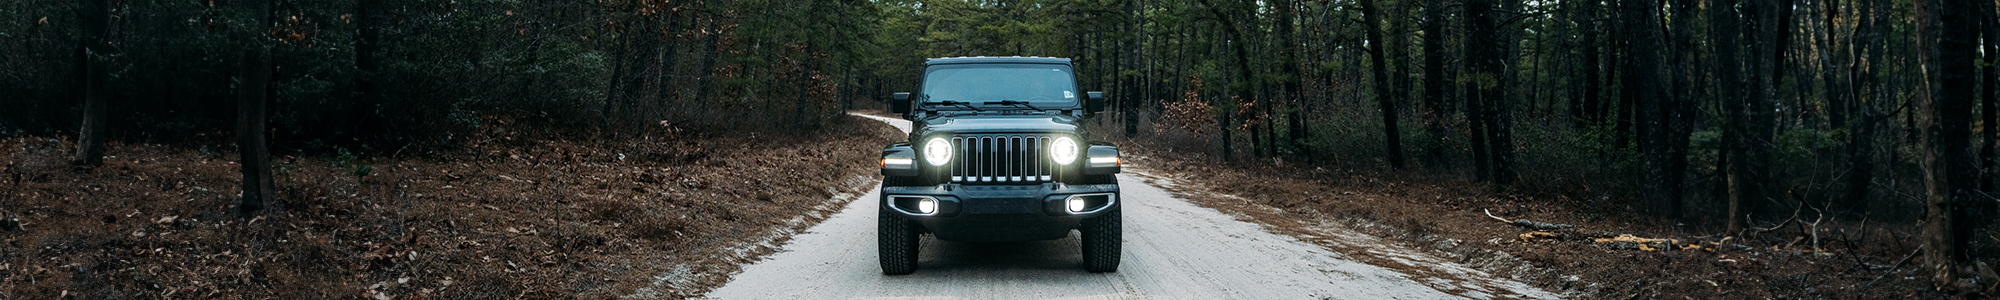 Jeep: Wharton State Forest Visiting Vehicle Use Map